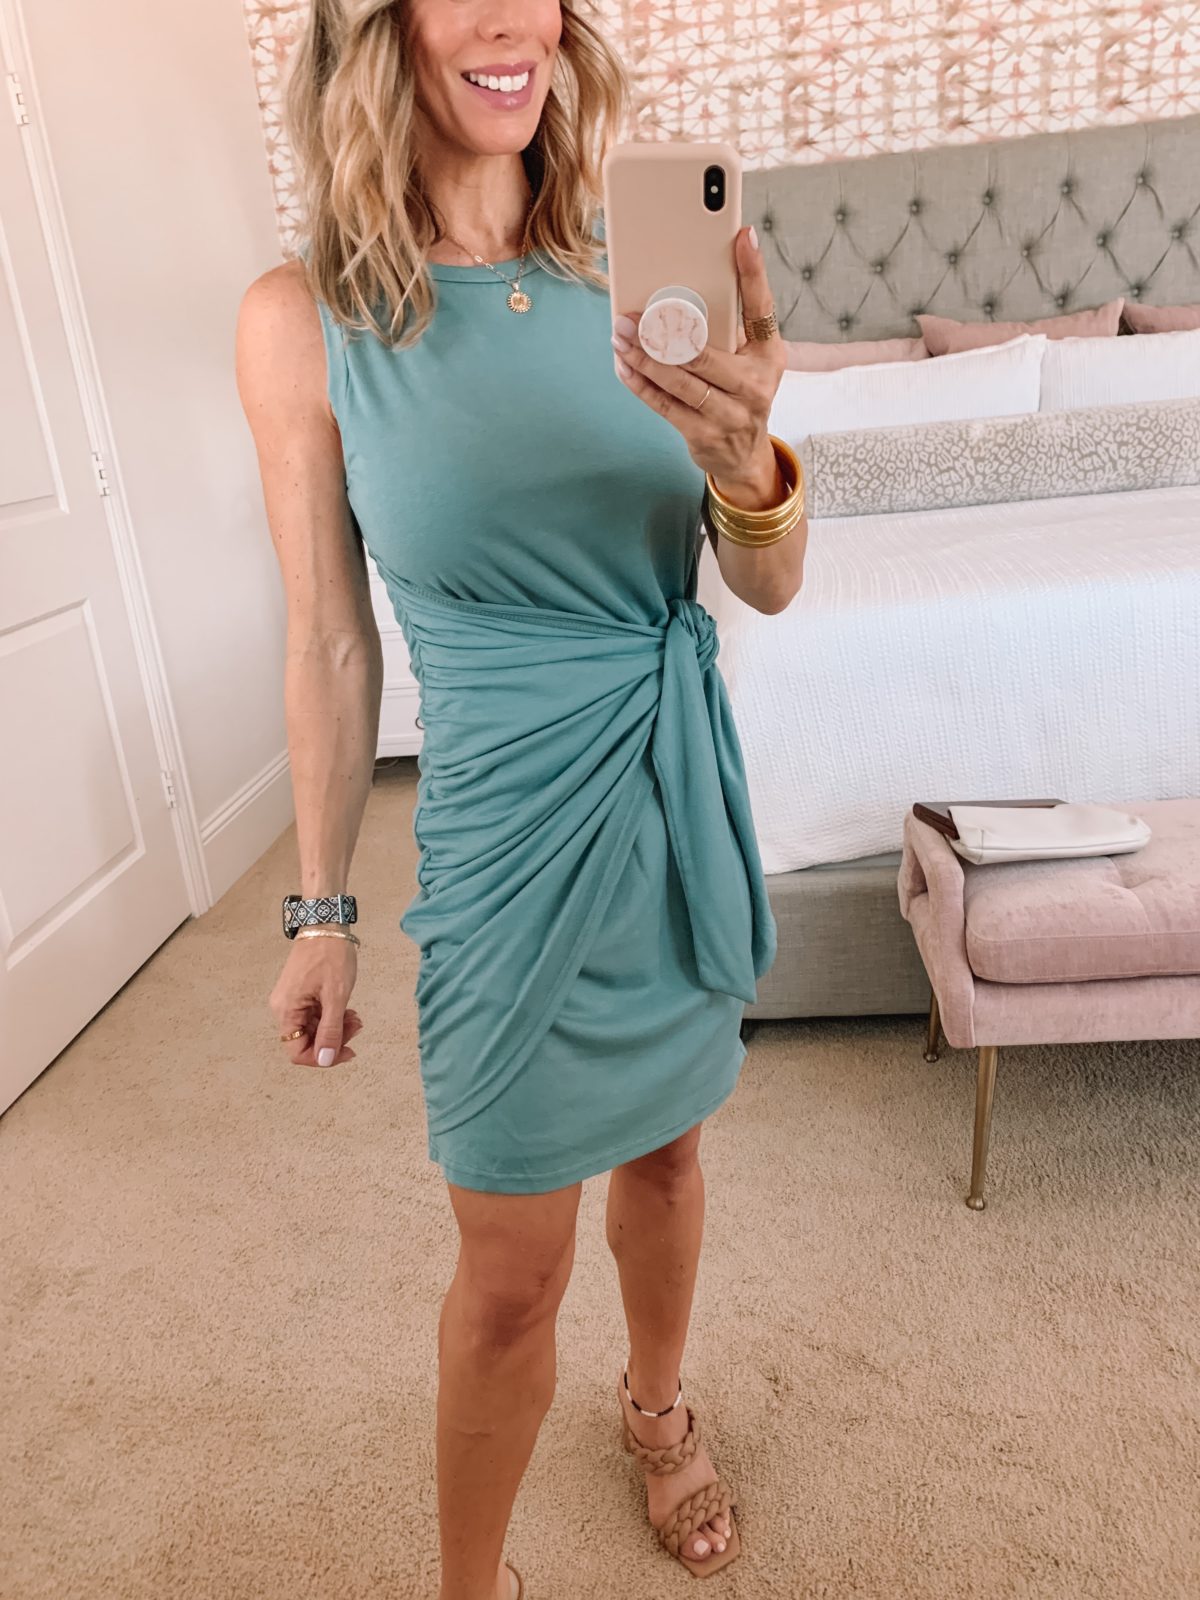 Amazon Fashion Faves, Tie Waist Dress and Sandals with Clutch 